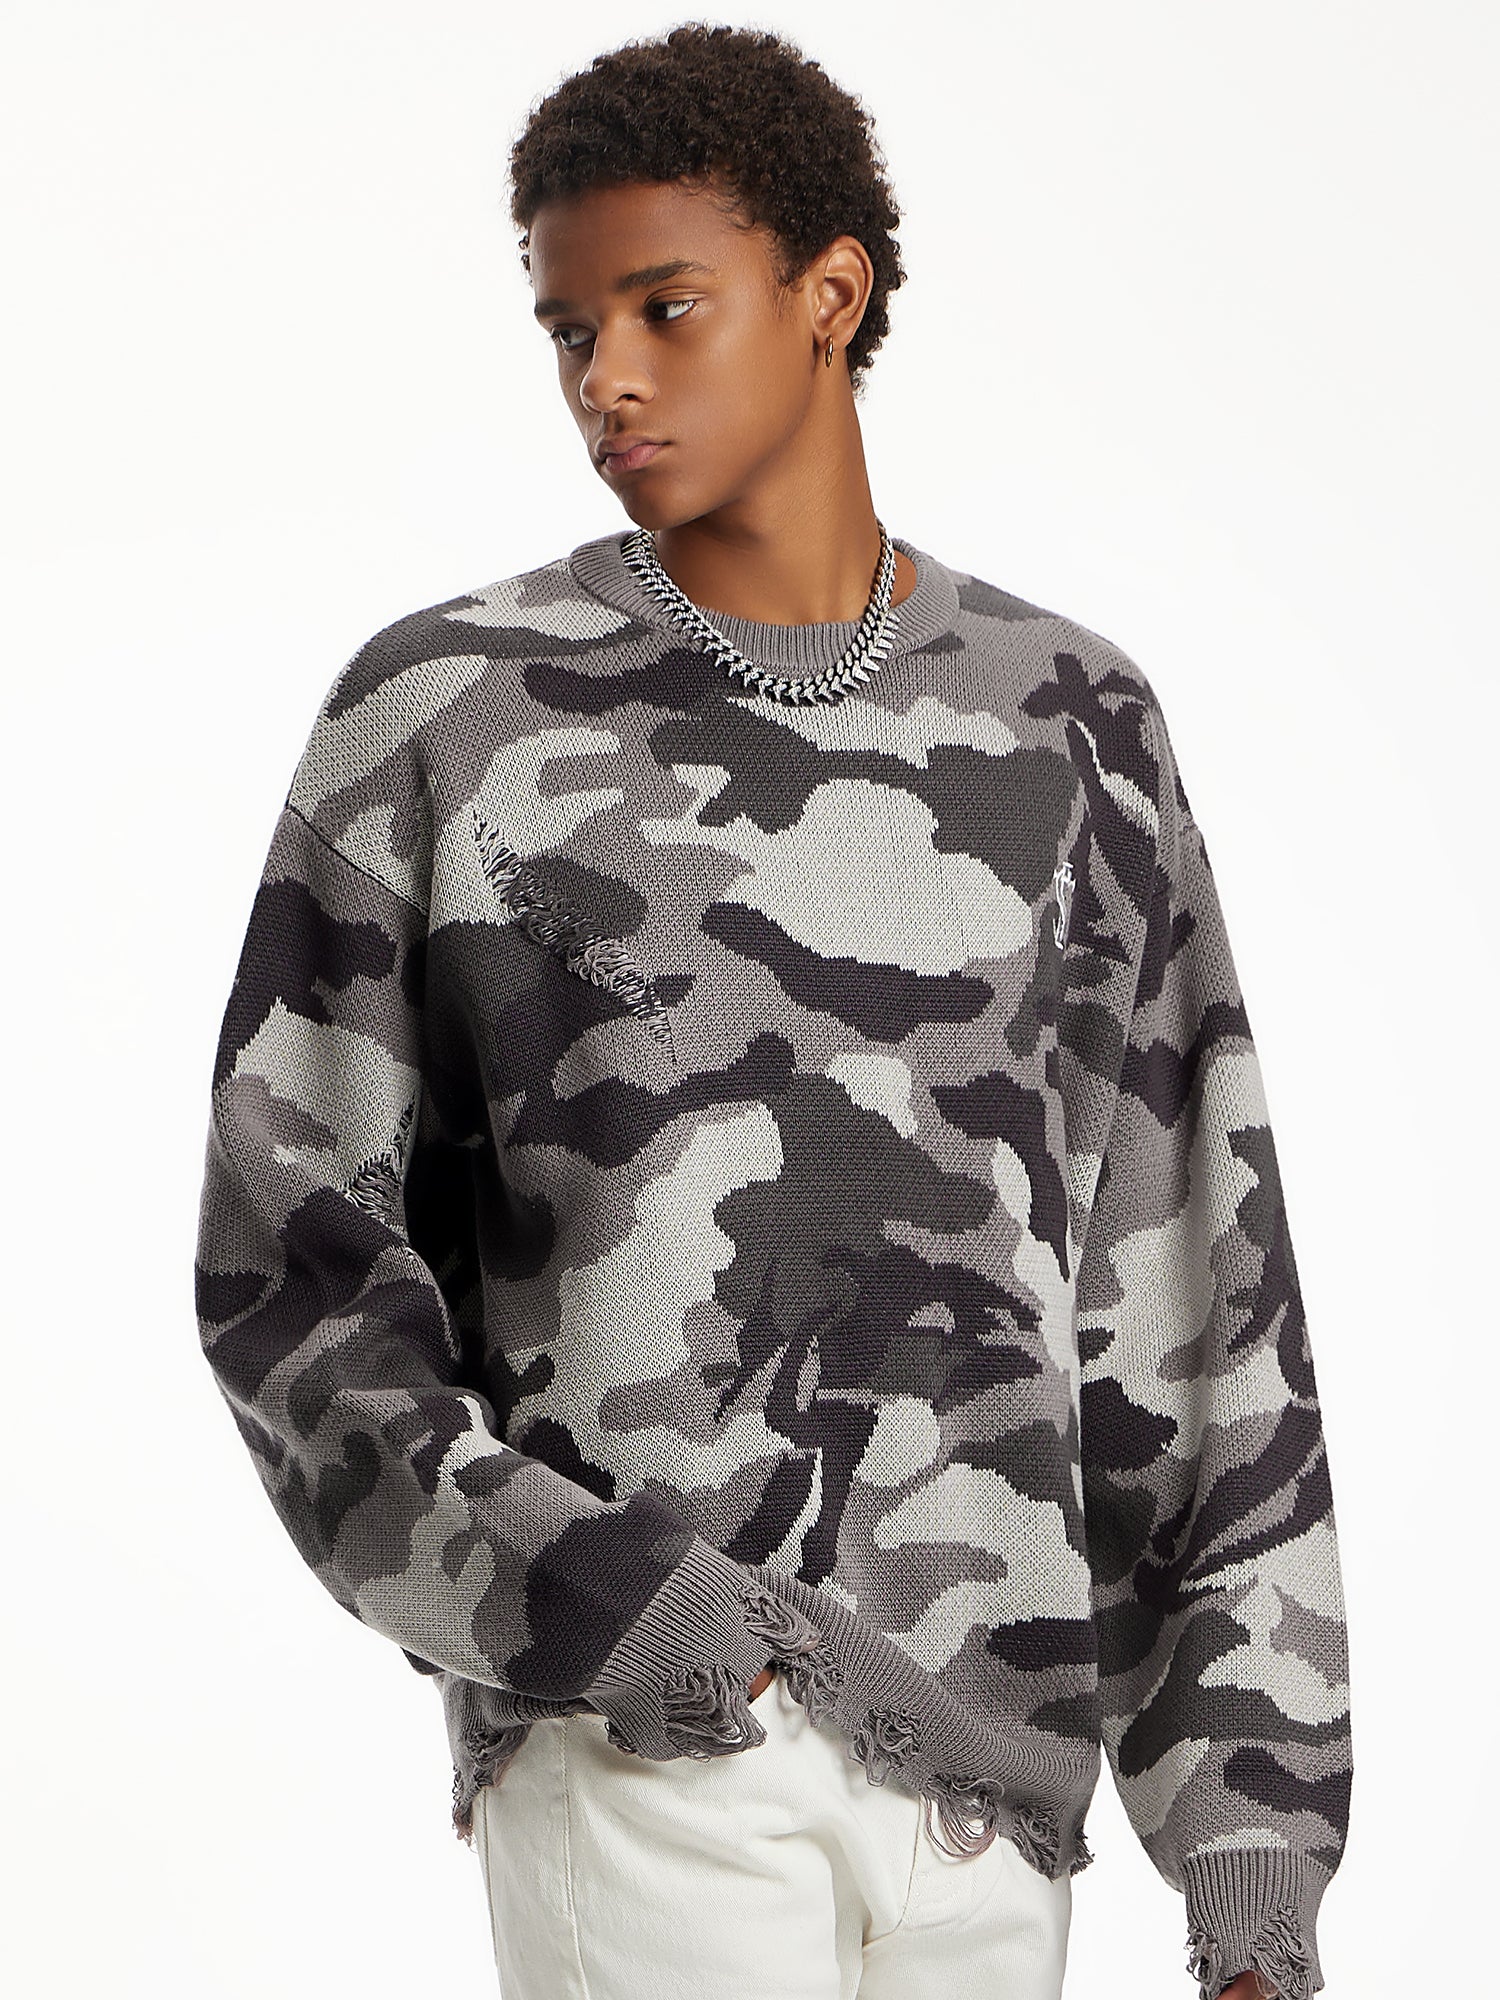 Camouflage Knitted Sweater - PSYLOS 1, Camouflage Knitted Sweater, Sweater, Small Town Kid, PSYLOS 1